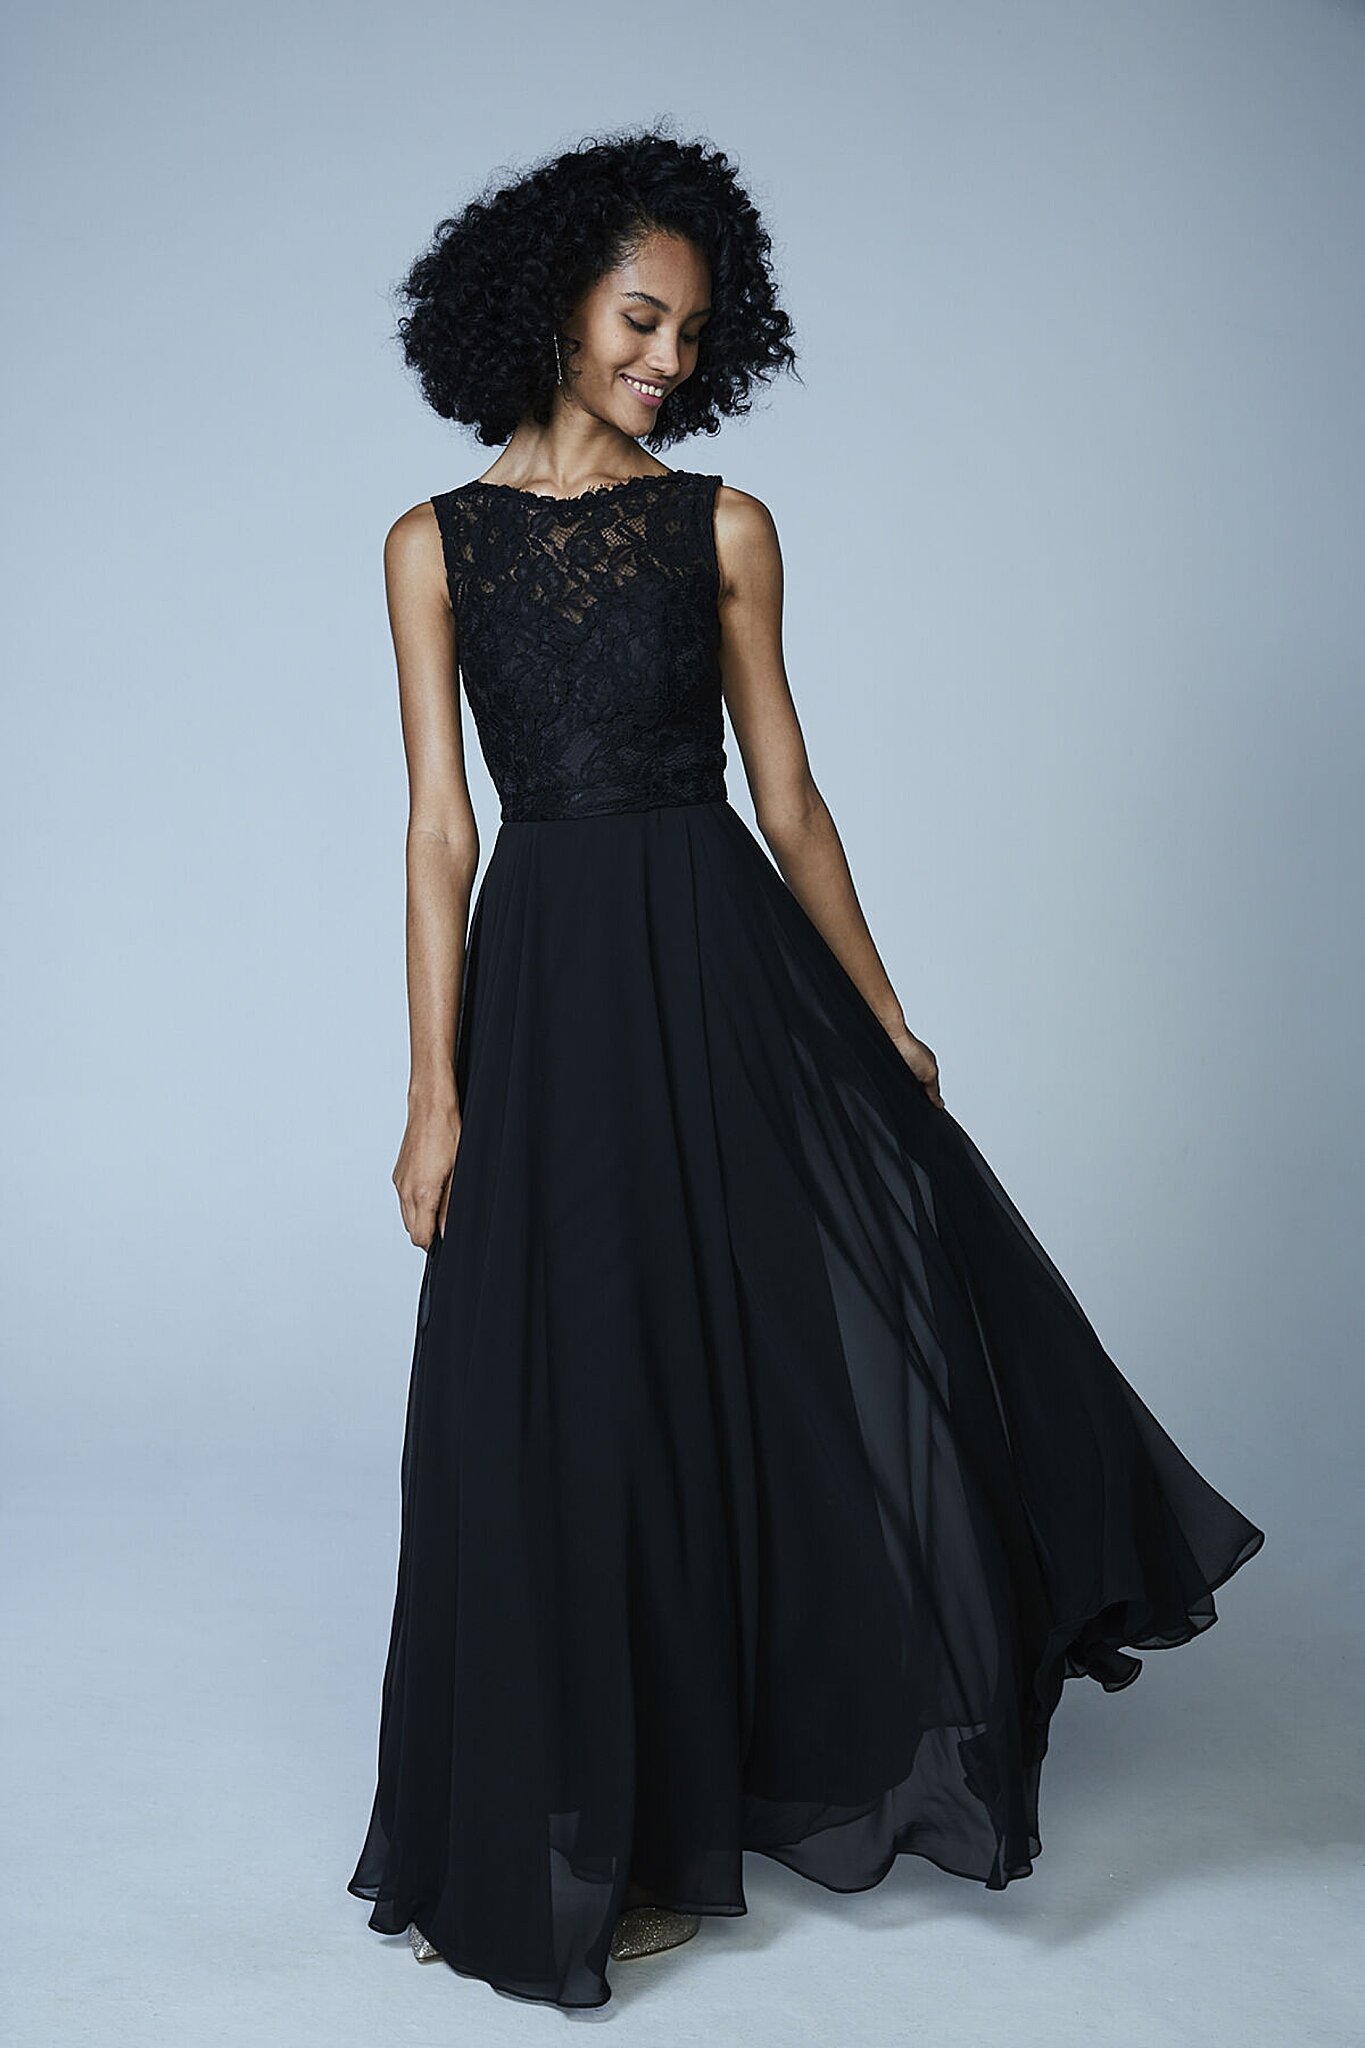 black wedding dresses for bride with moody style